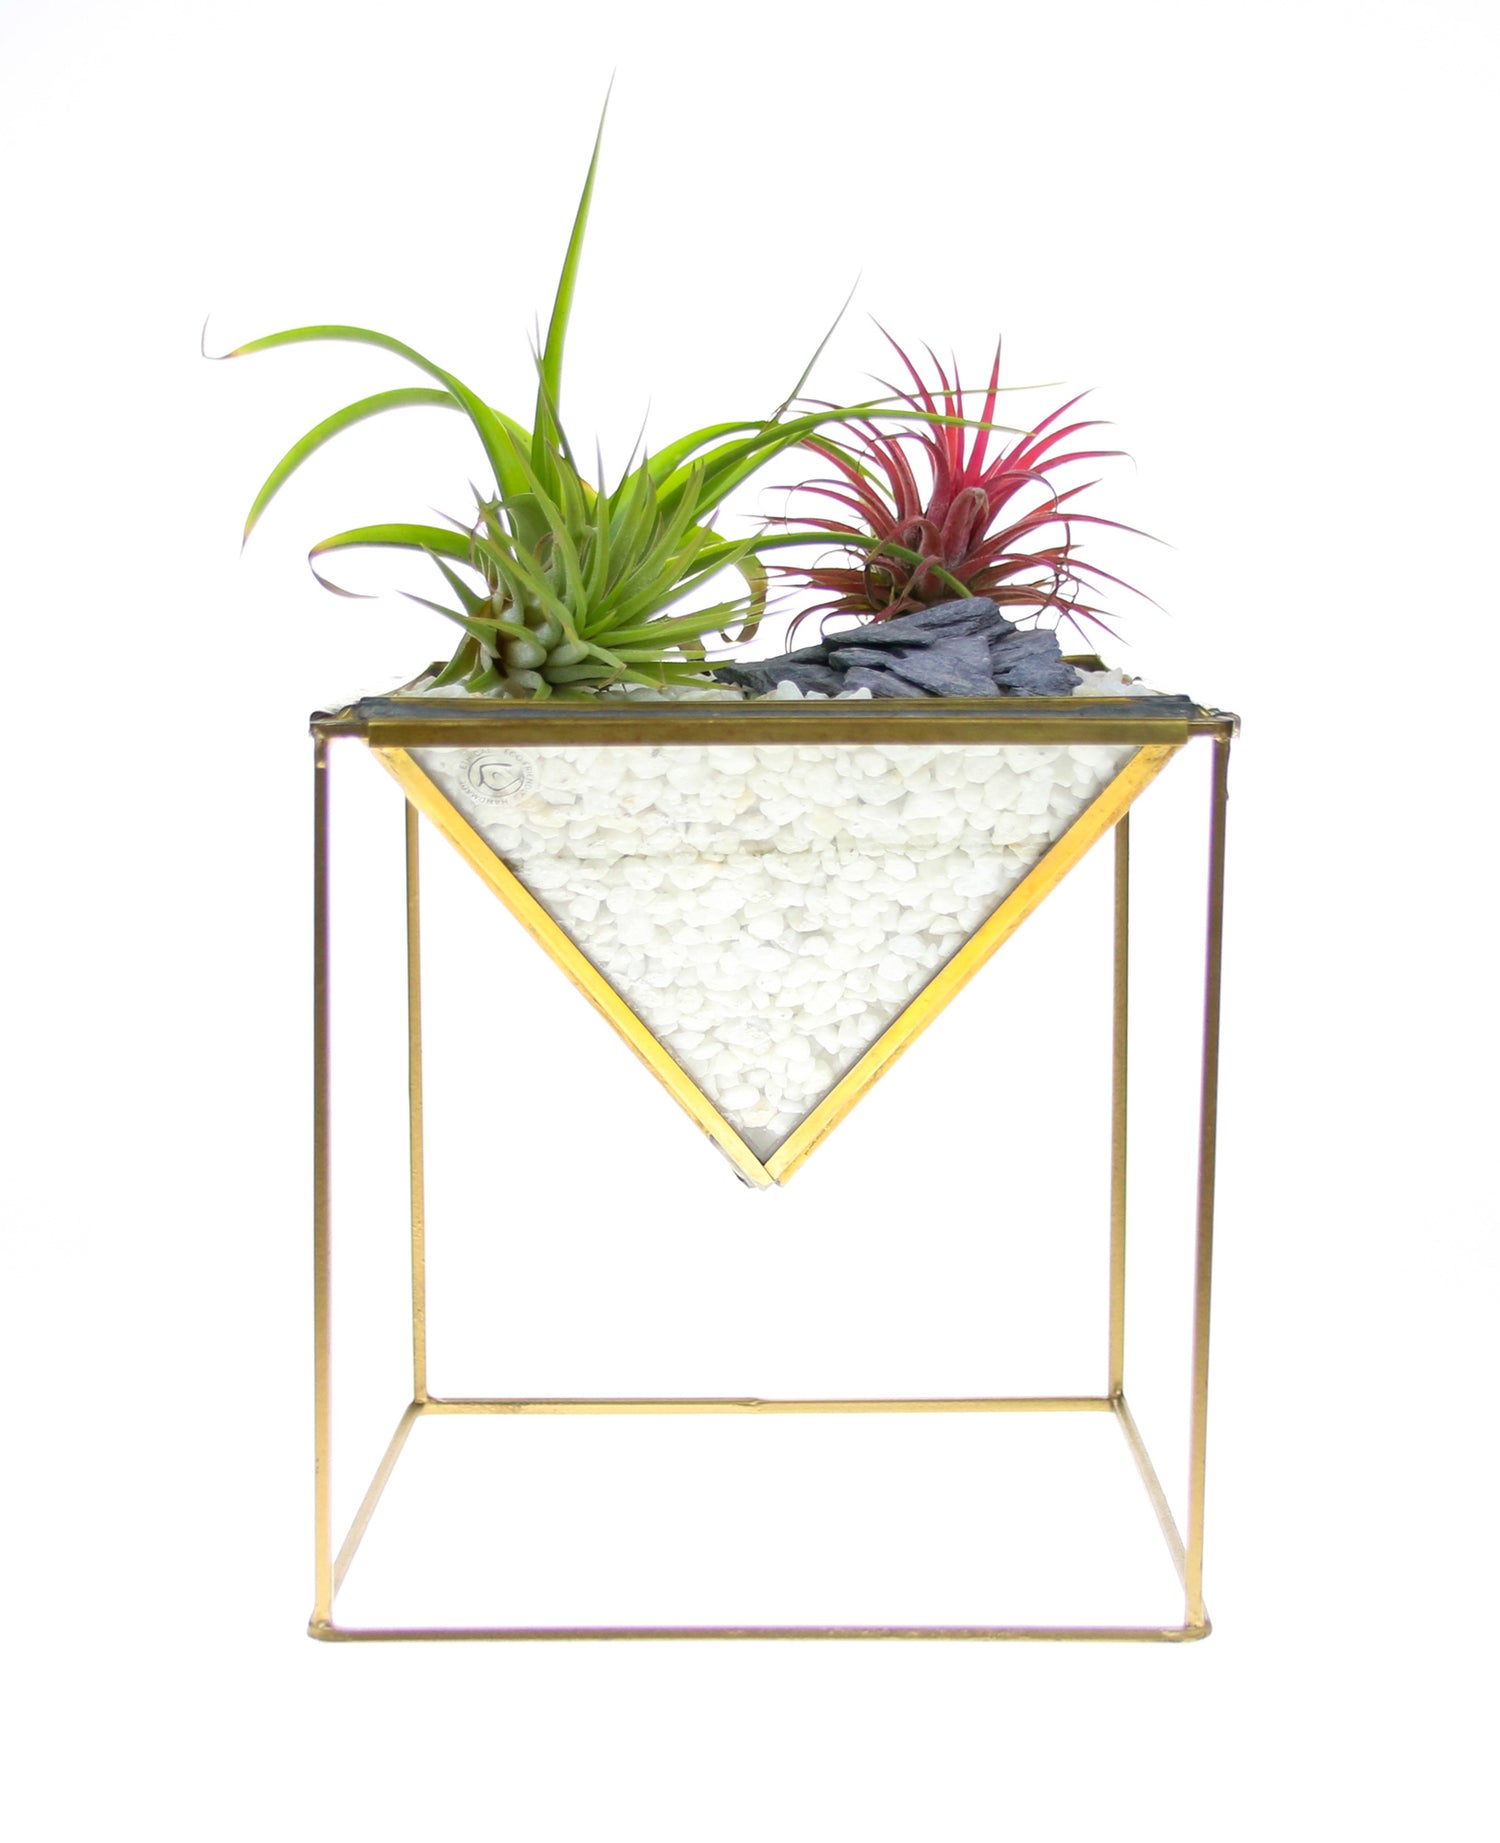 Planter with air plants